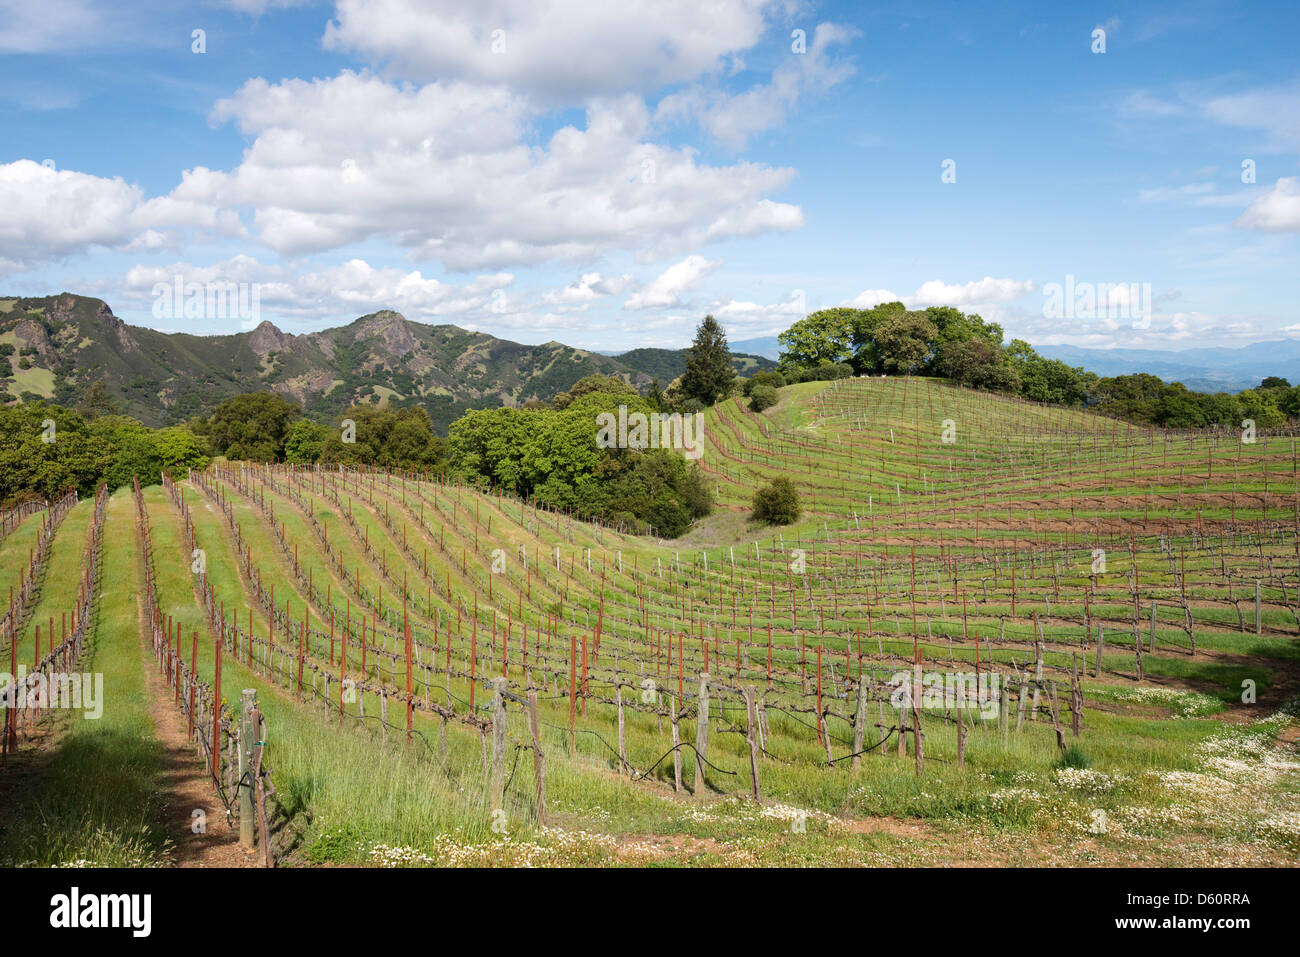 A vineyard on rolling hills in the Rockpile appellation of Sonoma Wine Country in the Spring near Healdsburg, CA. Stock Photo